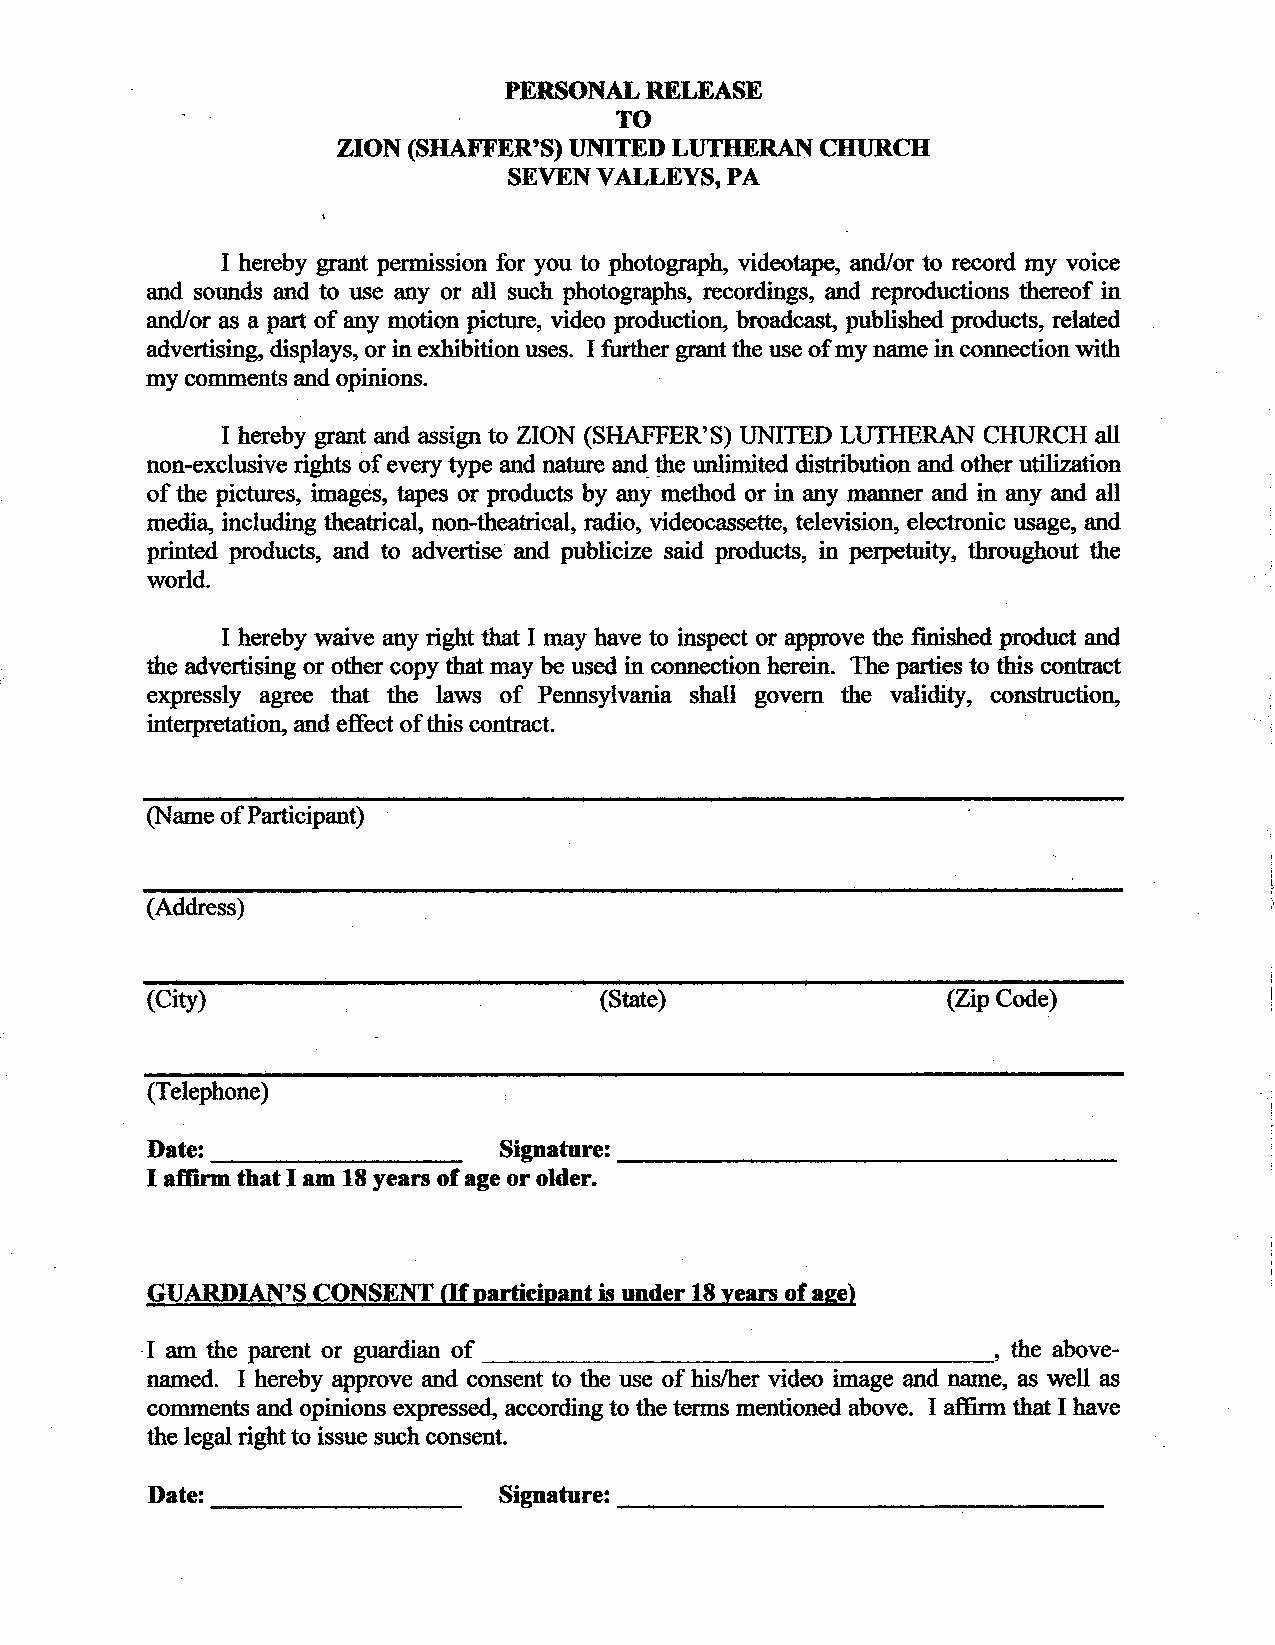 Mortgage Protection Letter Template - Tax Lien Release Letter Fearsome Copyright Release form Best Raci